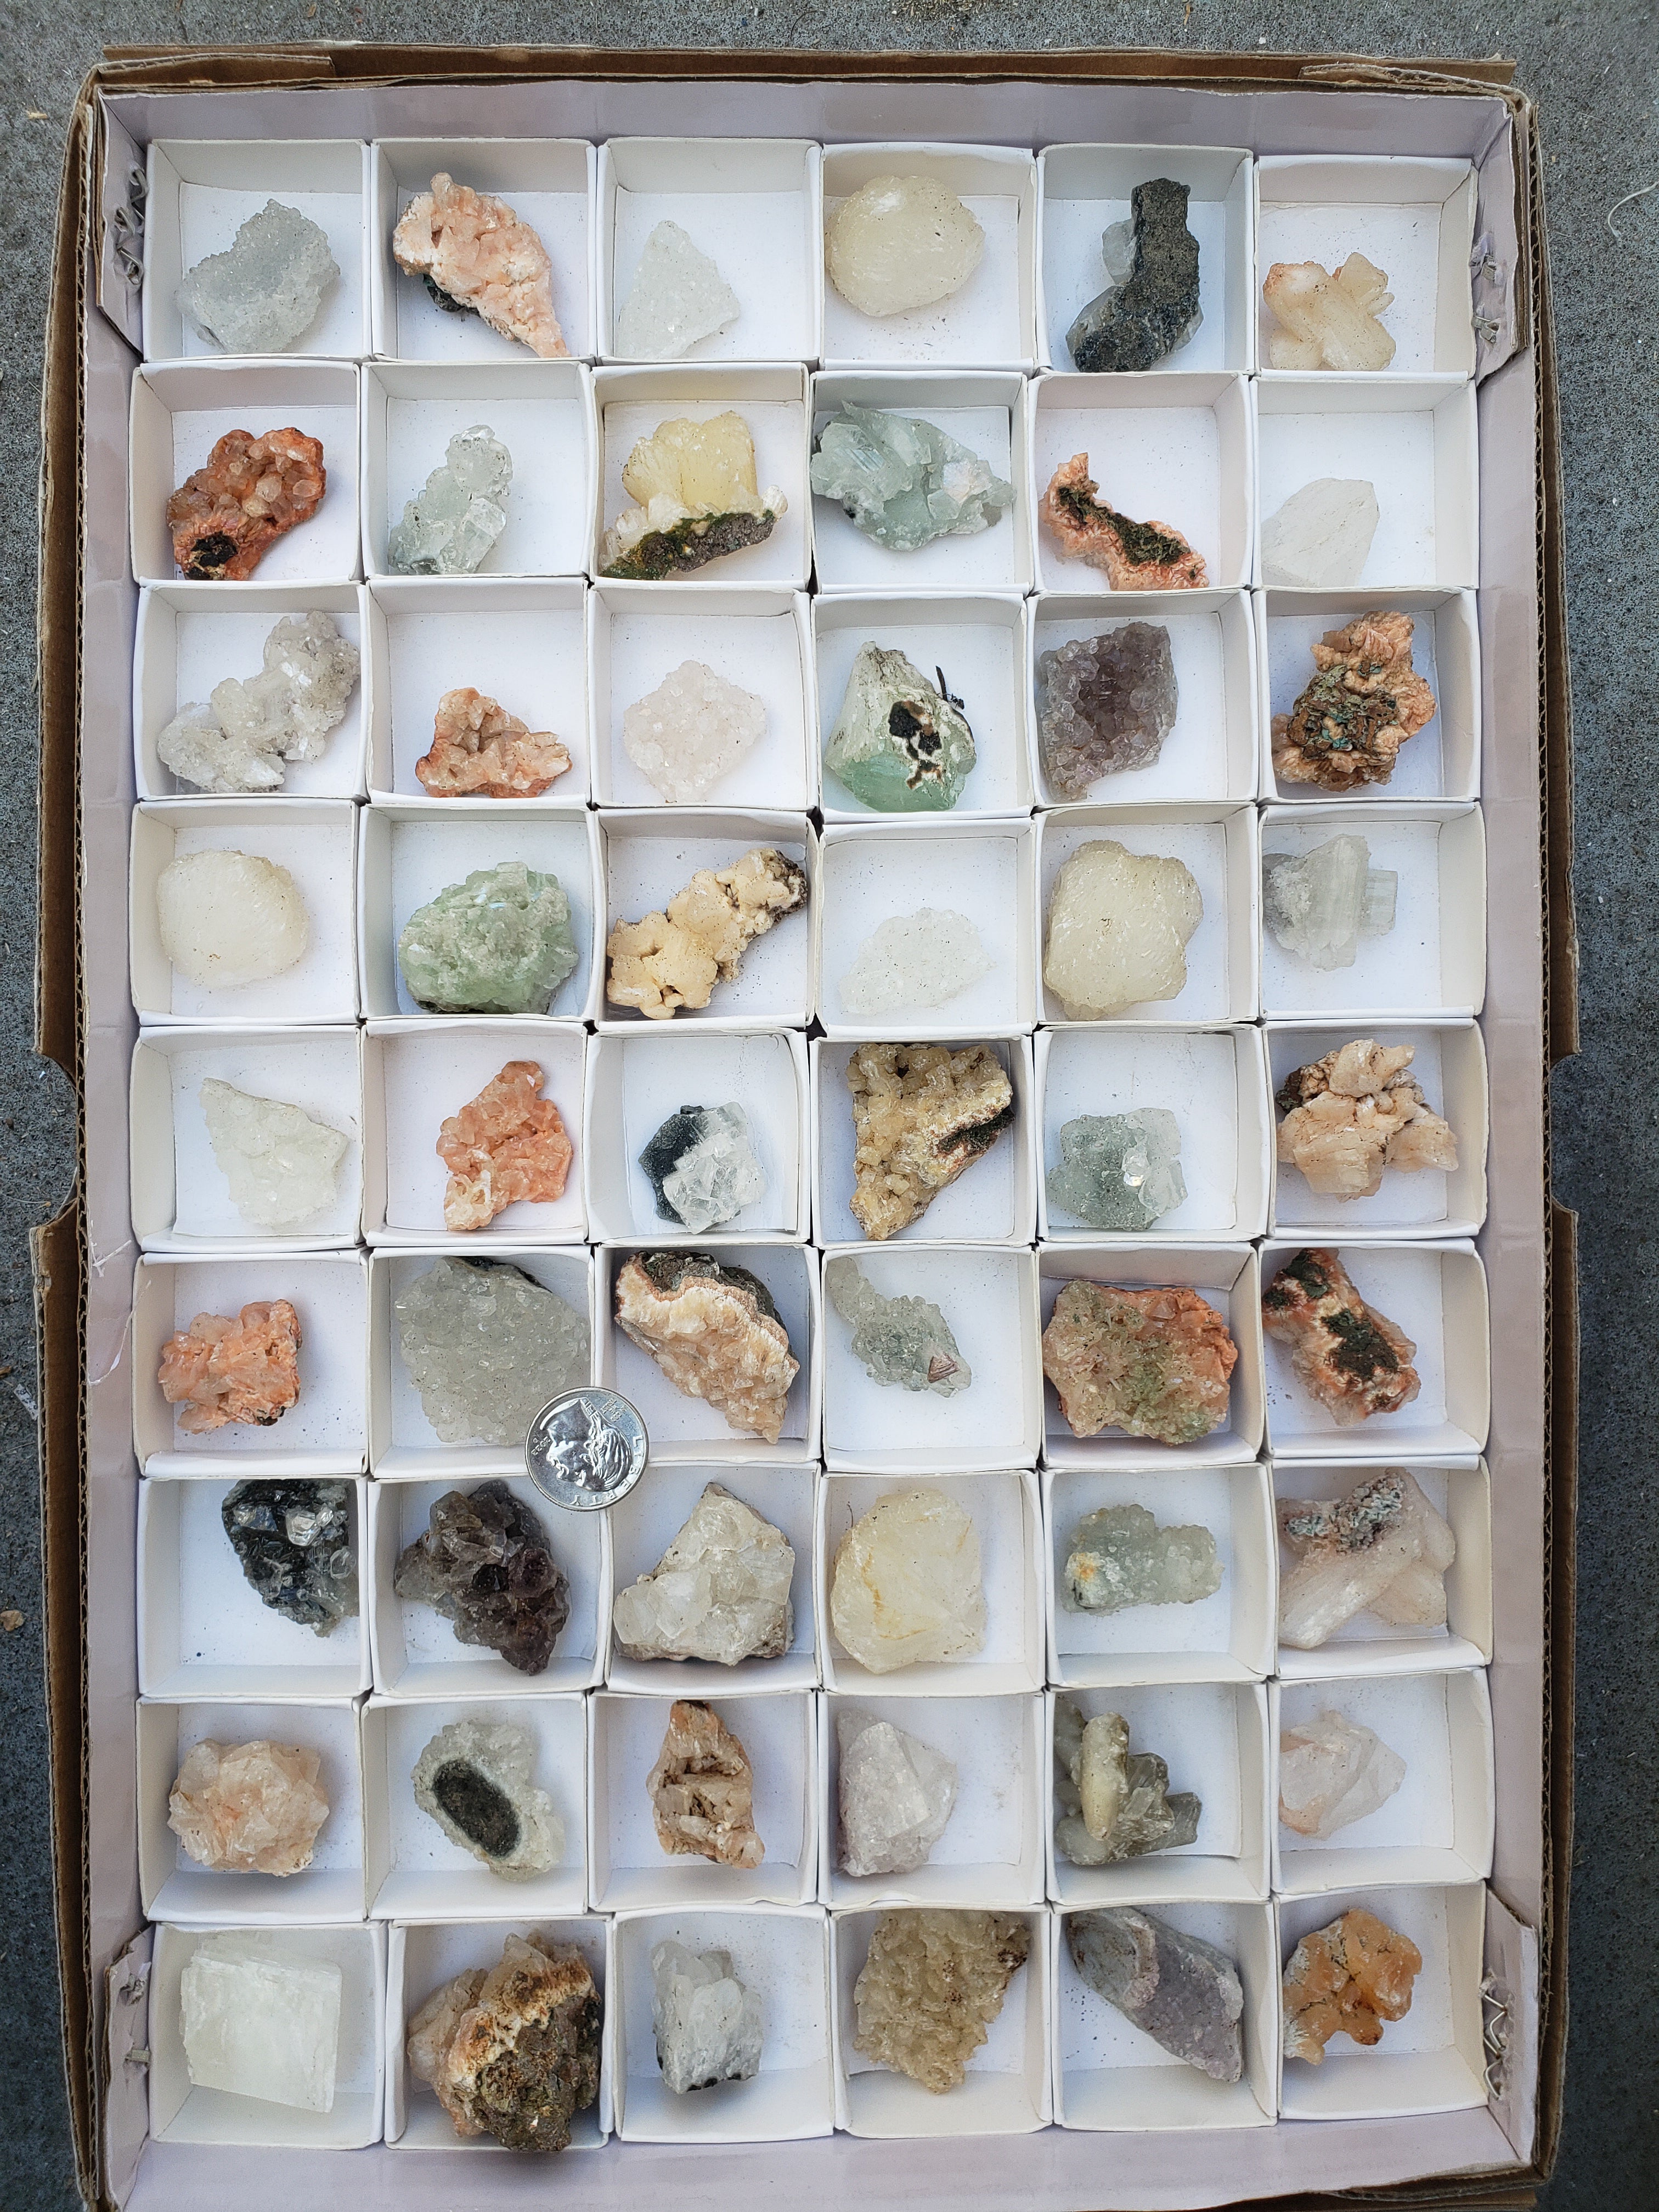 Mixed minerals flat 15x10.5 various minerals and Crystals from